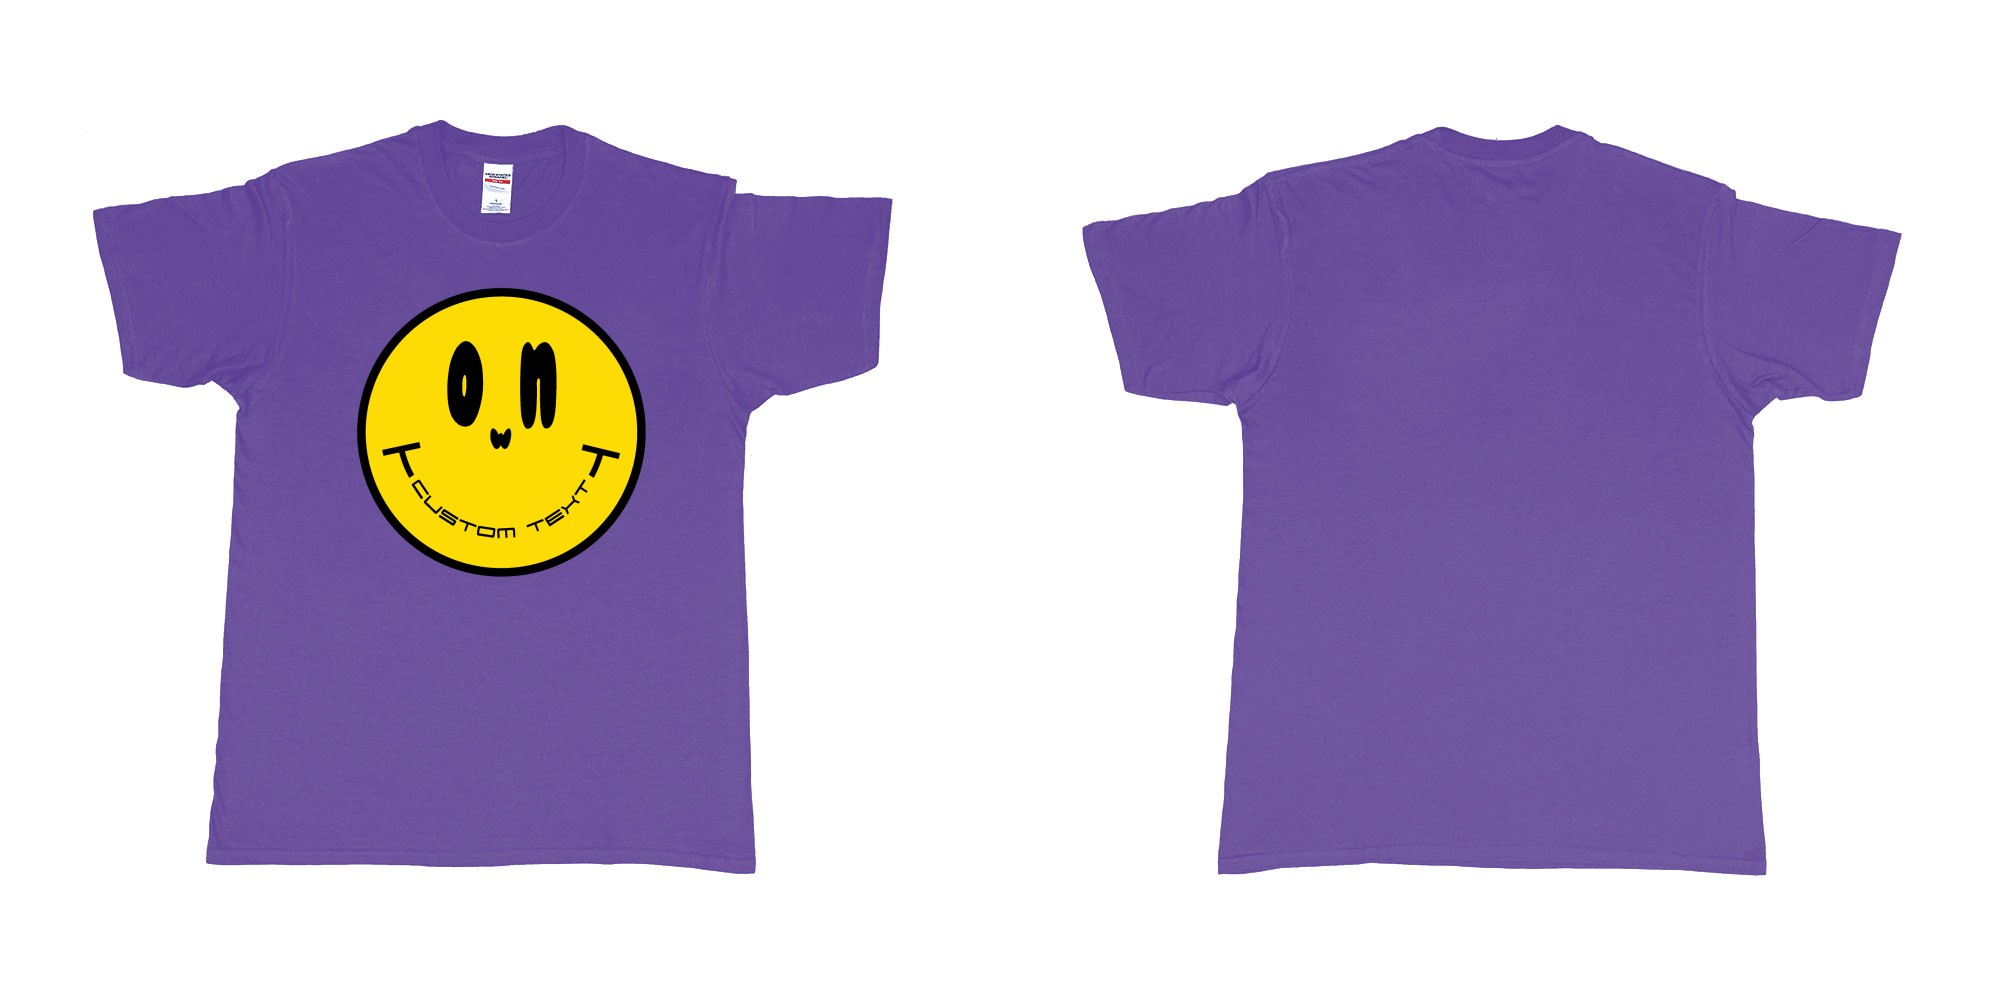 Custom tshirt design smiley face emoji custom text in fabric color purple choice your own text made in Bali by The Pirate Way